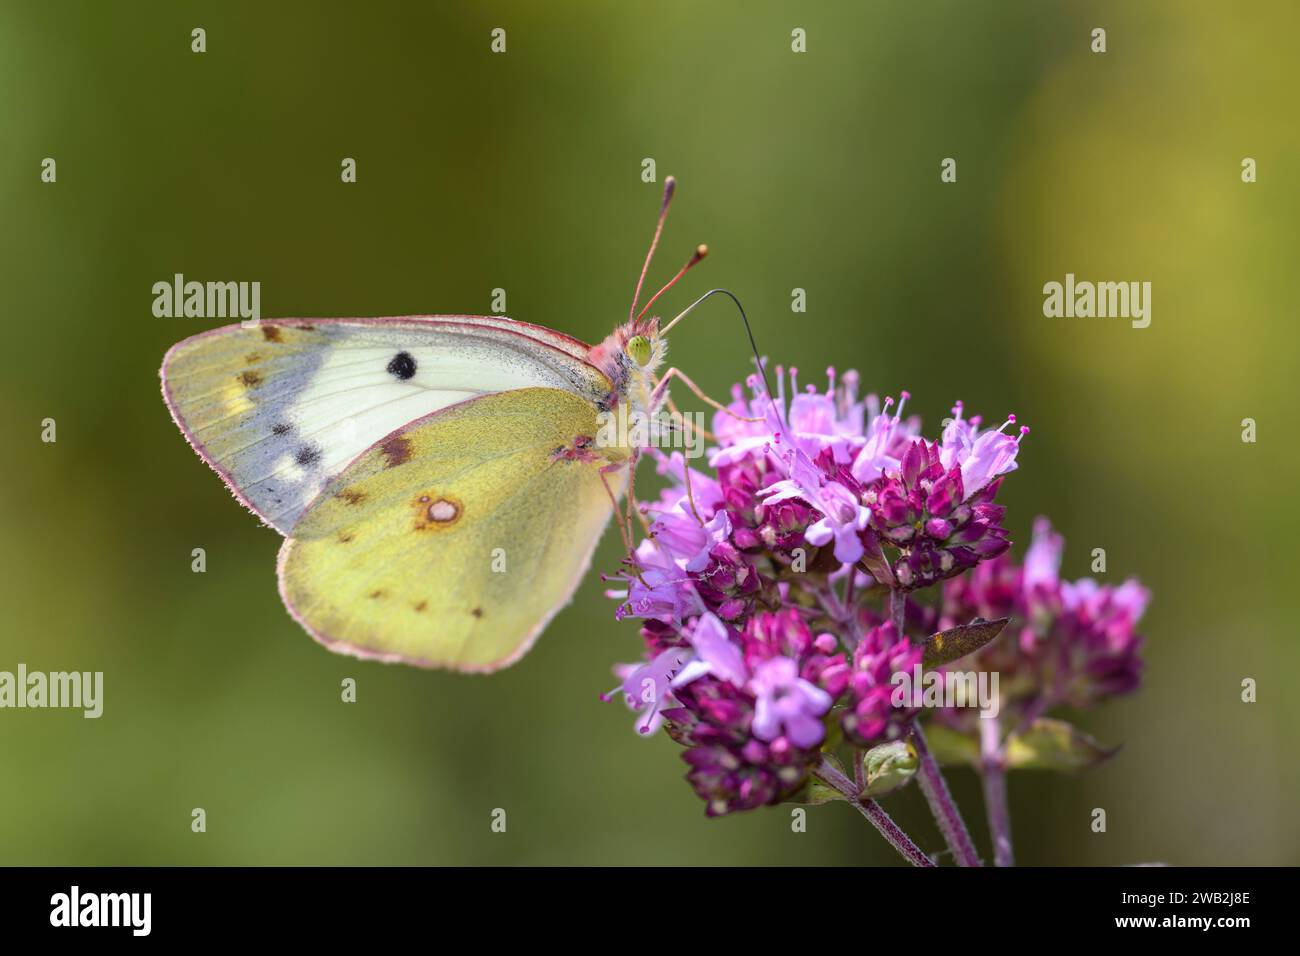 A pale clouded yellow Butterfly - Colias hyale sucks nectar with its trunk from the blossom of Origanum vulgare - Oregano or wild Marjoram Stock Photo